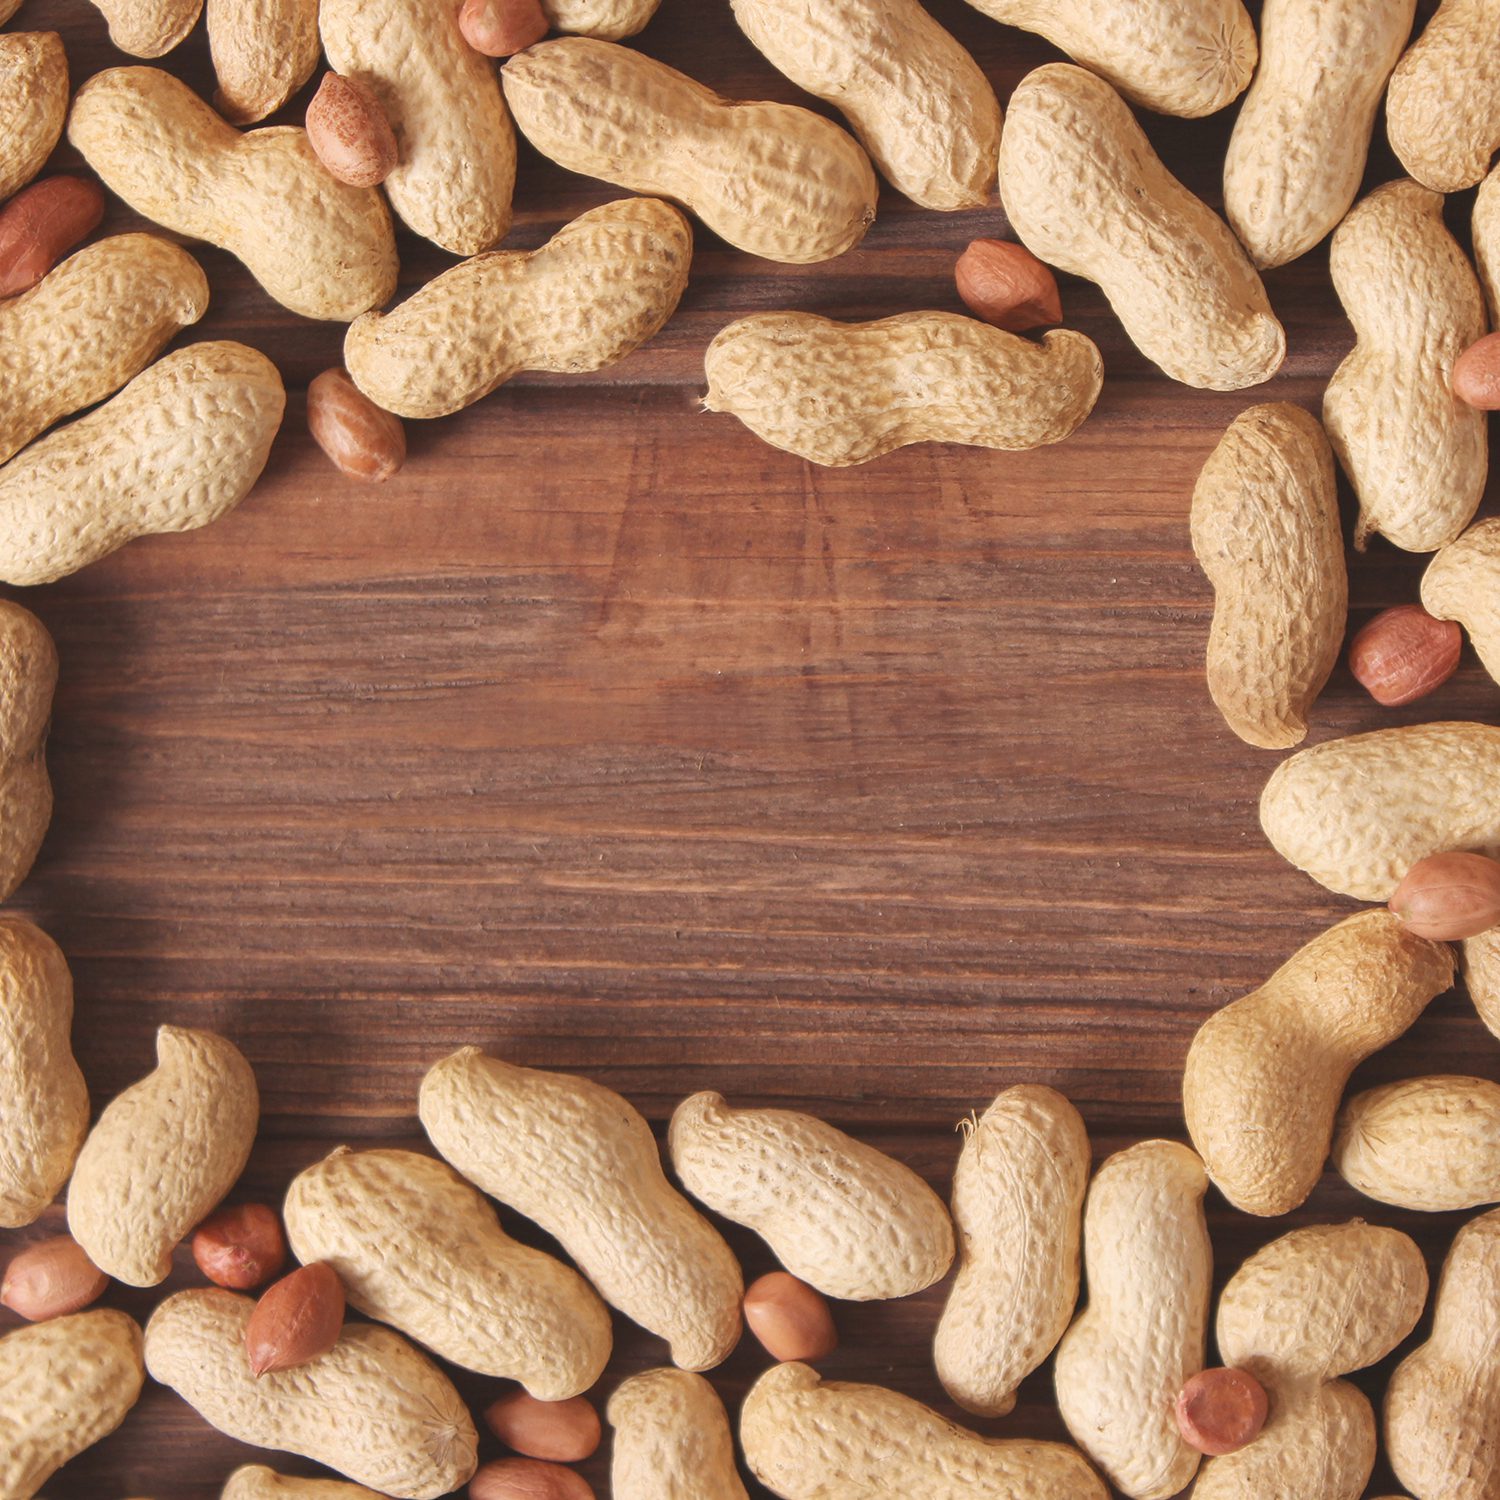  8 Best Natural Remedies for Peanut Allergies